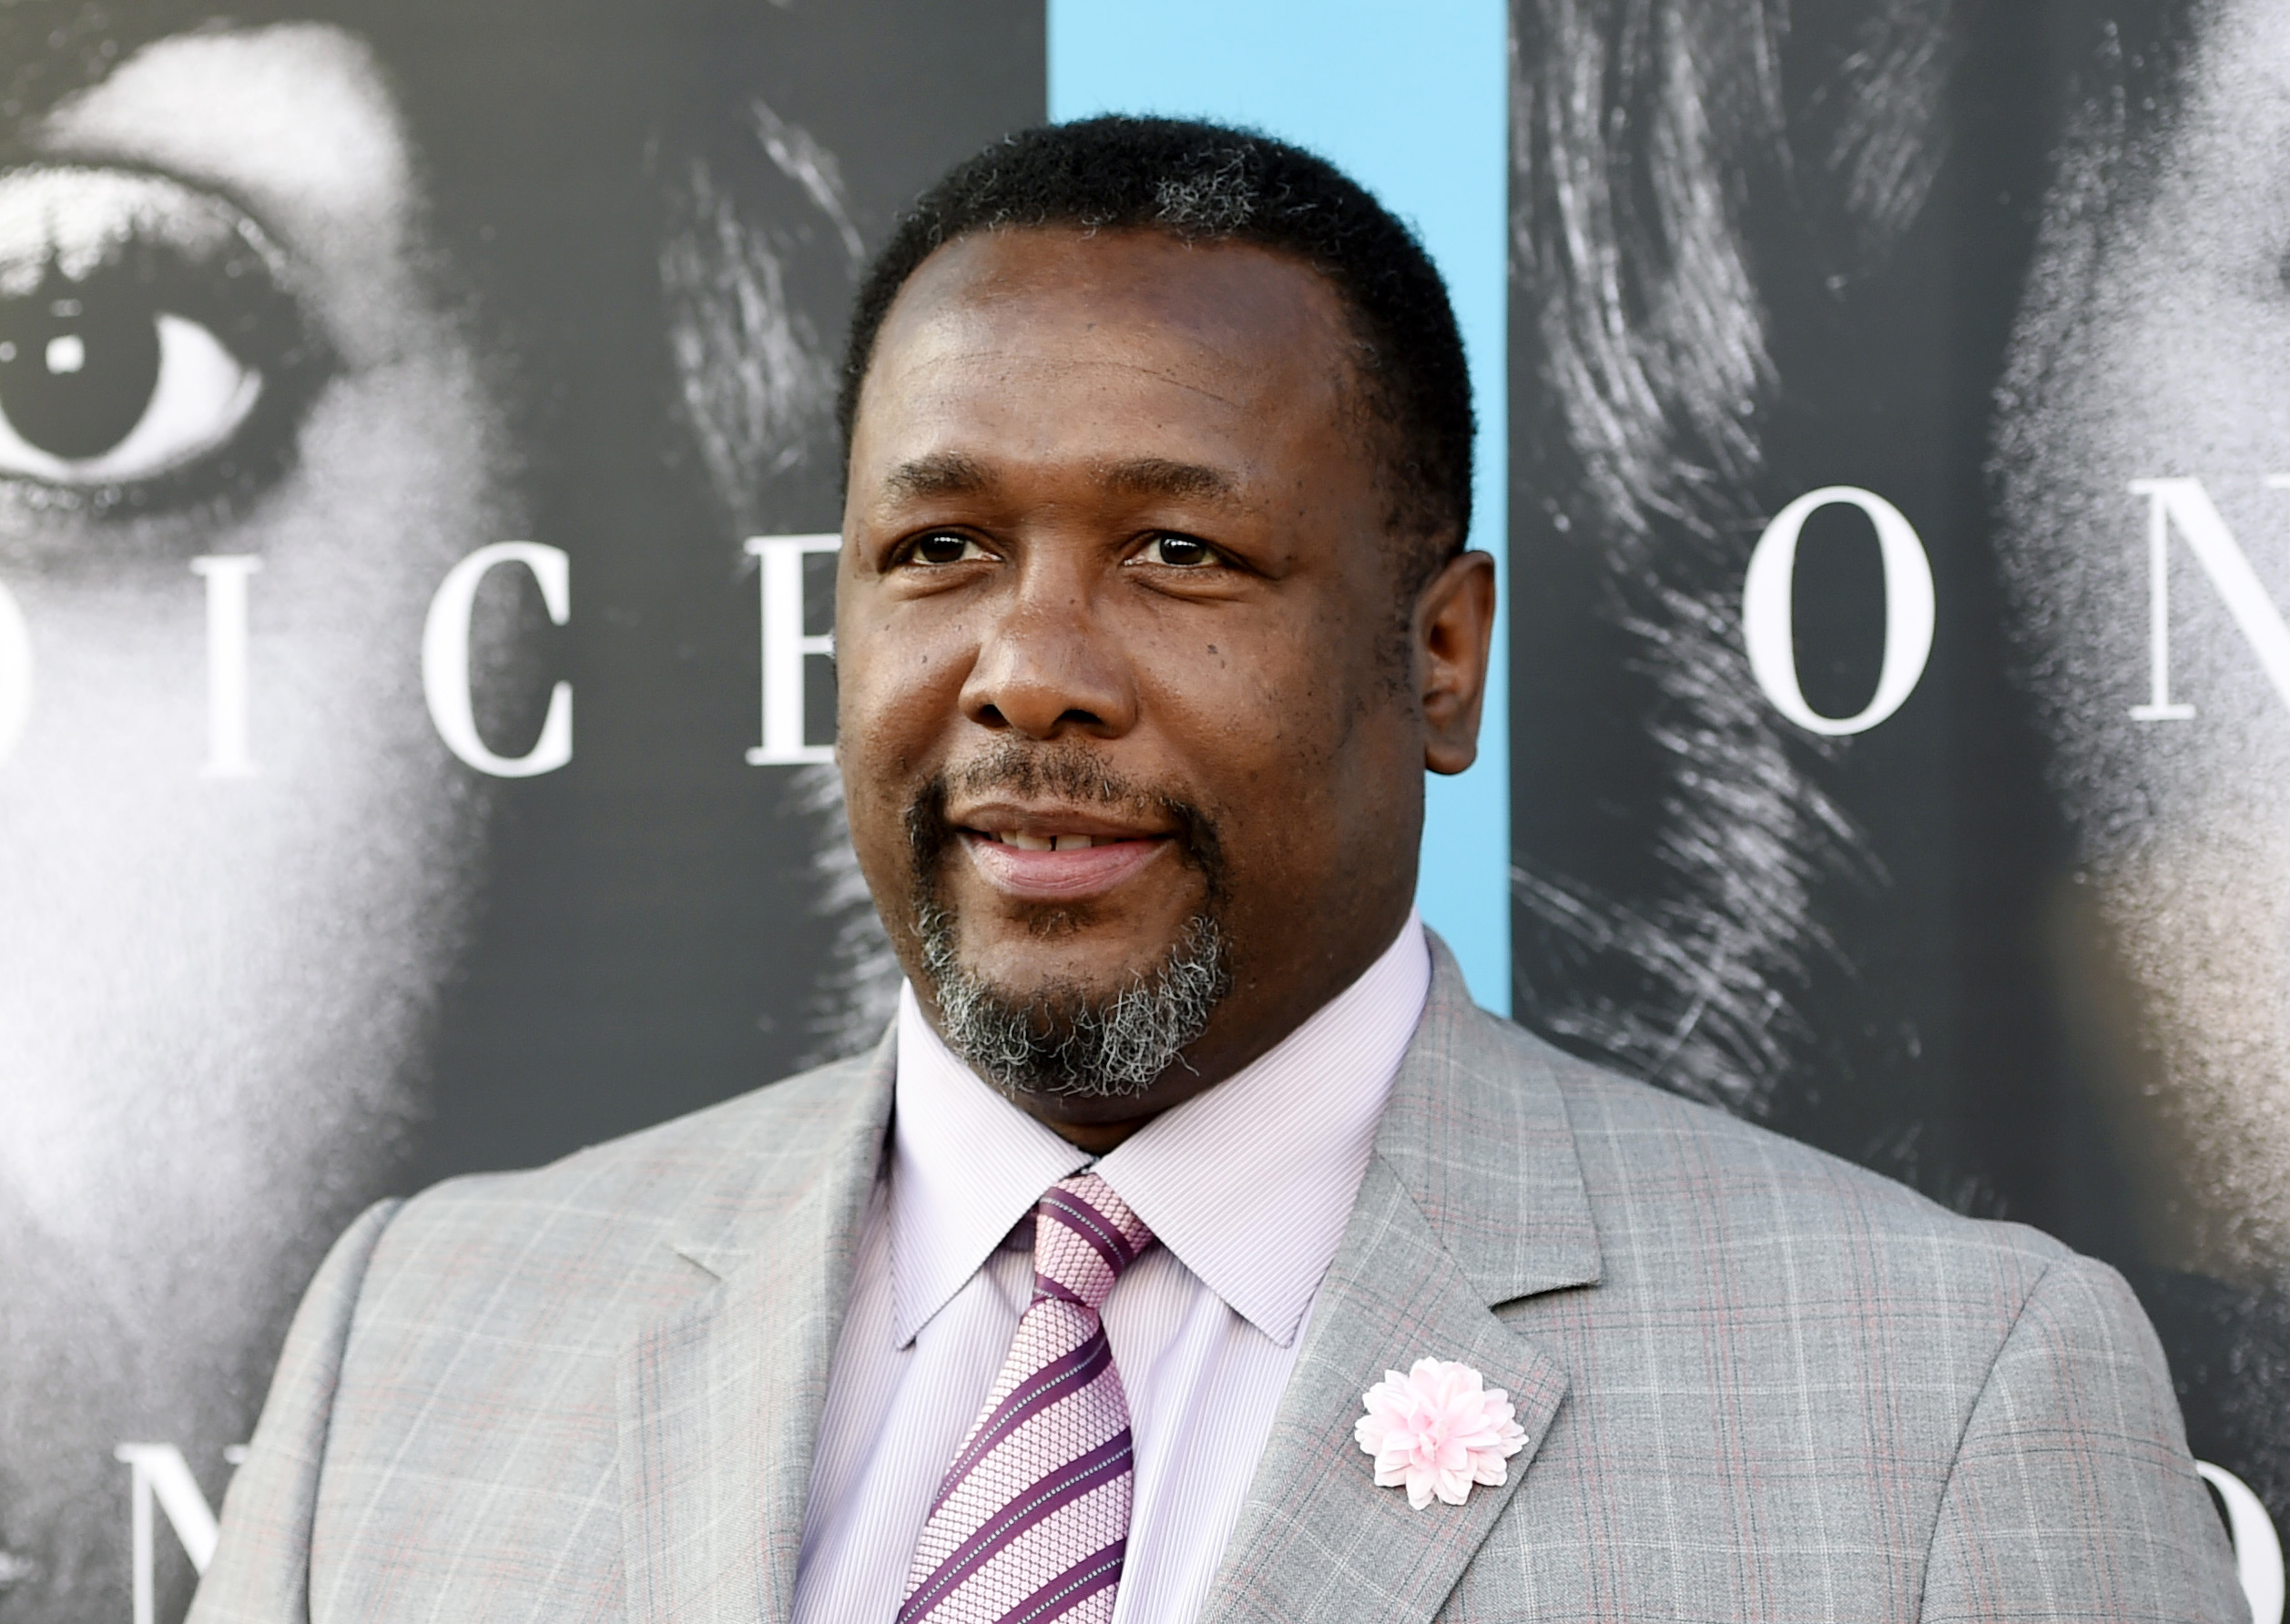 FILE - In this March 31, 2016 file photo, Wendell Pierce, a cast member in "Confirmation," poses at the premiere of the HBO film in Los Angeles. Pierce has decided not to attend and speak at a Rutgers University graduation ceremony in New Jersey following his arrest in Atlanta. TV news anchor Soledad OBrien will speak at Wednesdays commencement instead. (Photo by Chris Pizzello/Invision/AP, File)